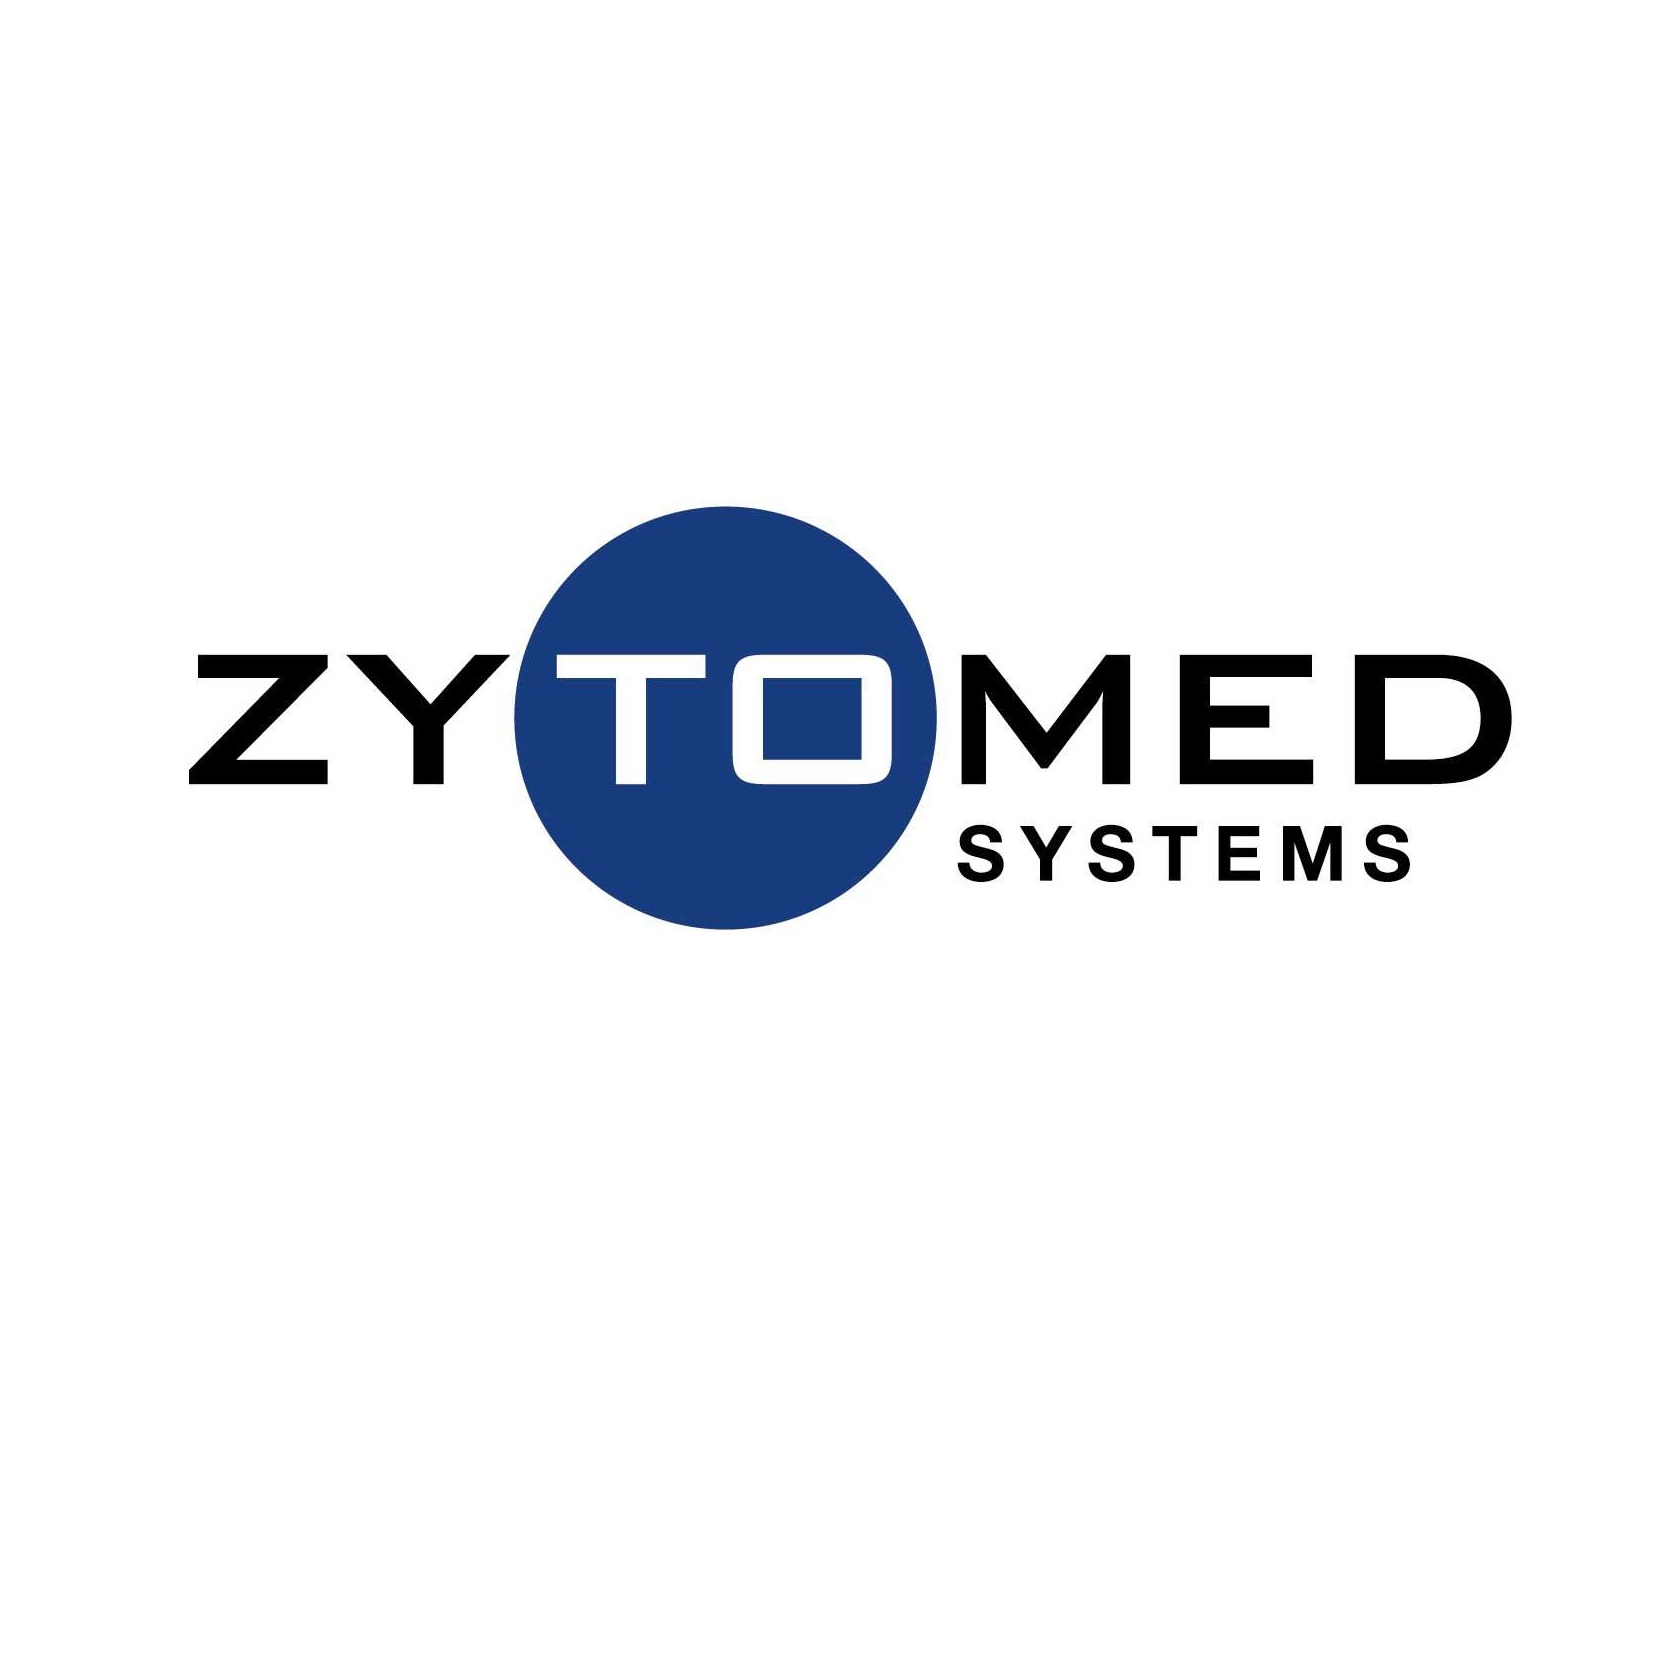 Zytomed Systems